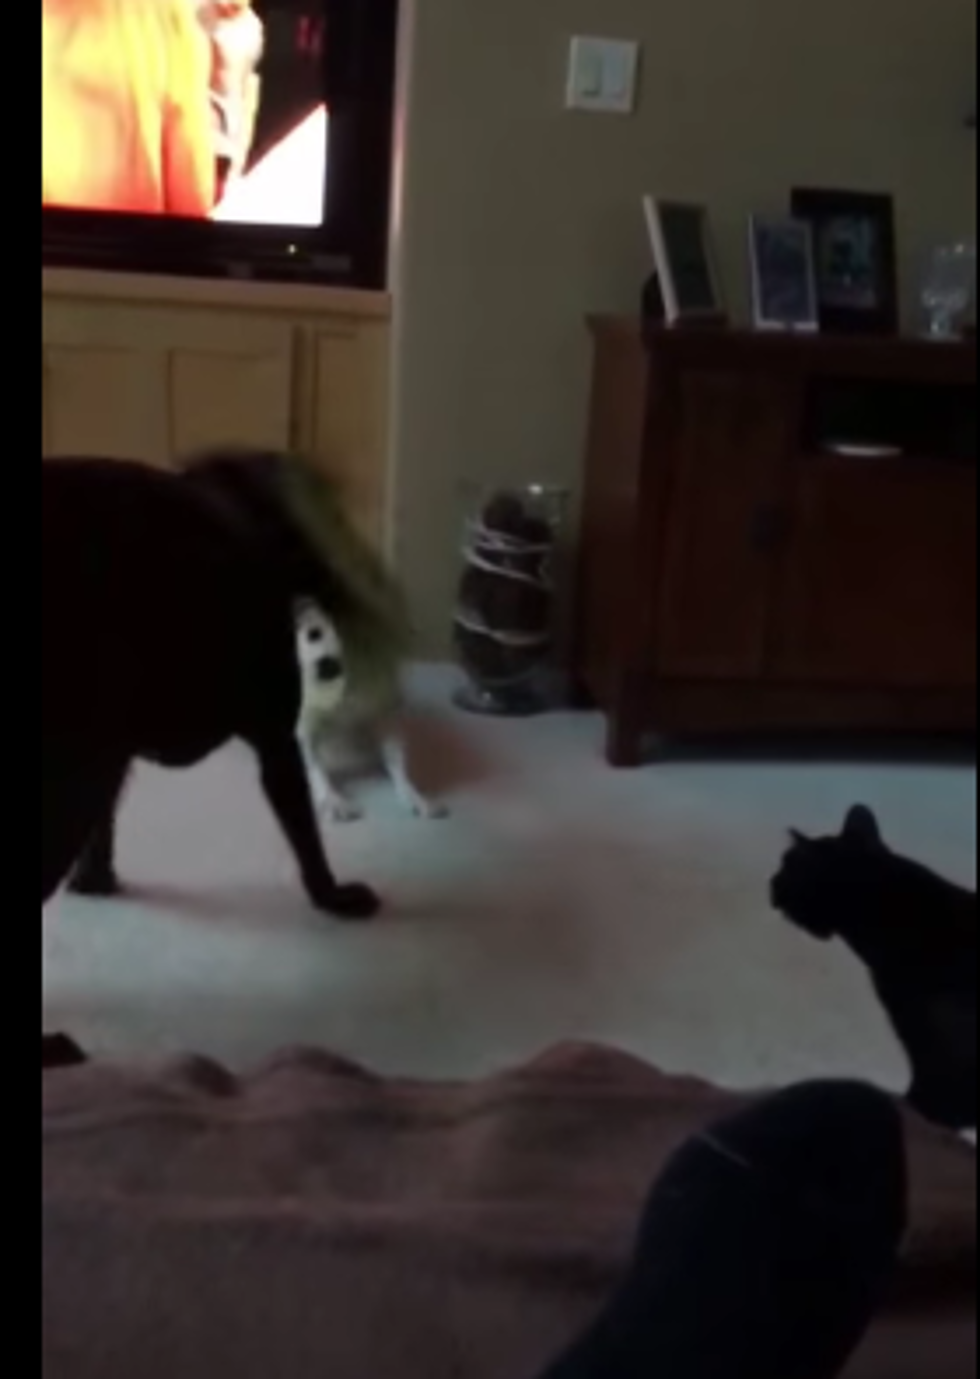 A Cat Fed Up With Dogs Fighting, Took Things Into His Own… Paws [VIDEO]